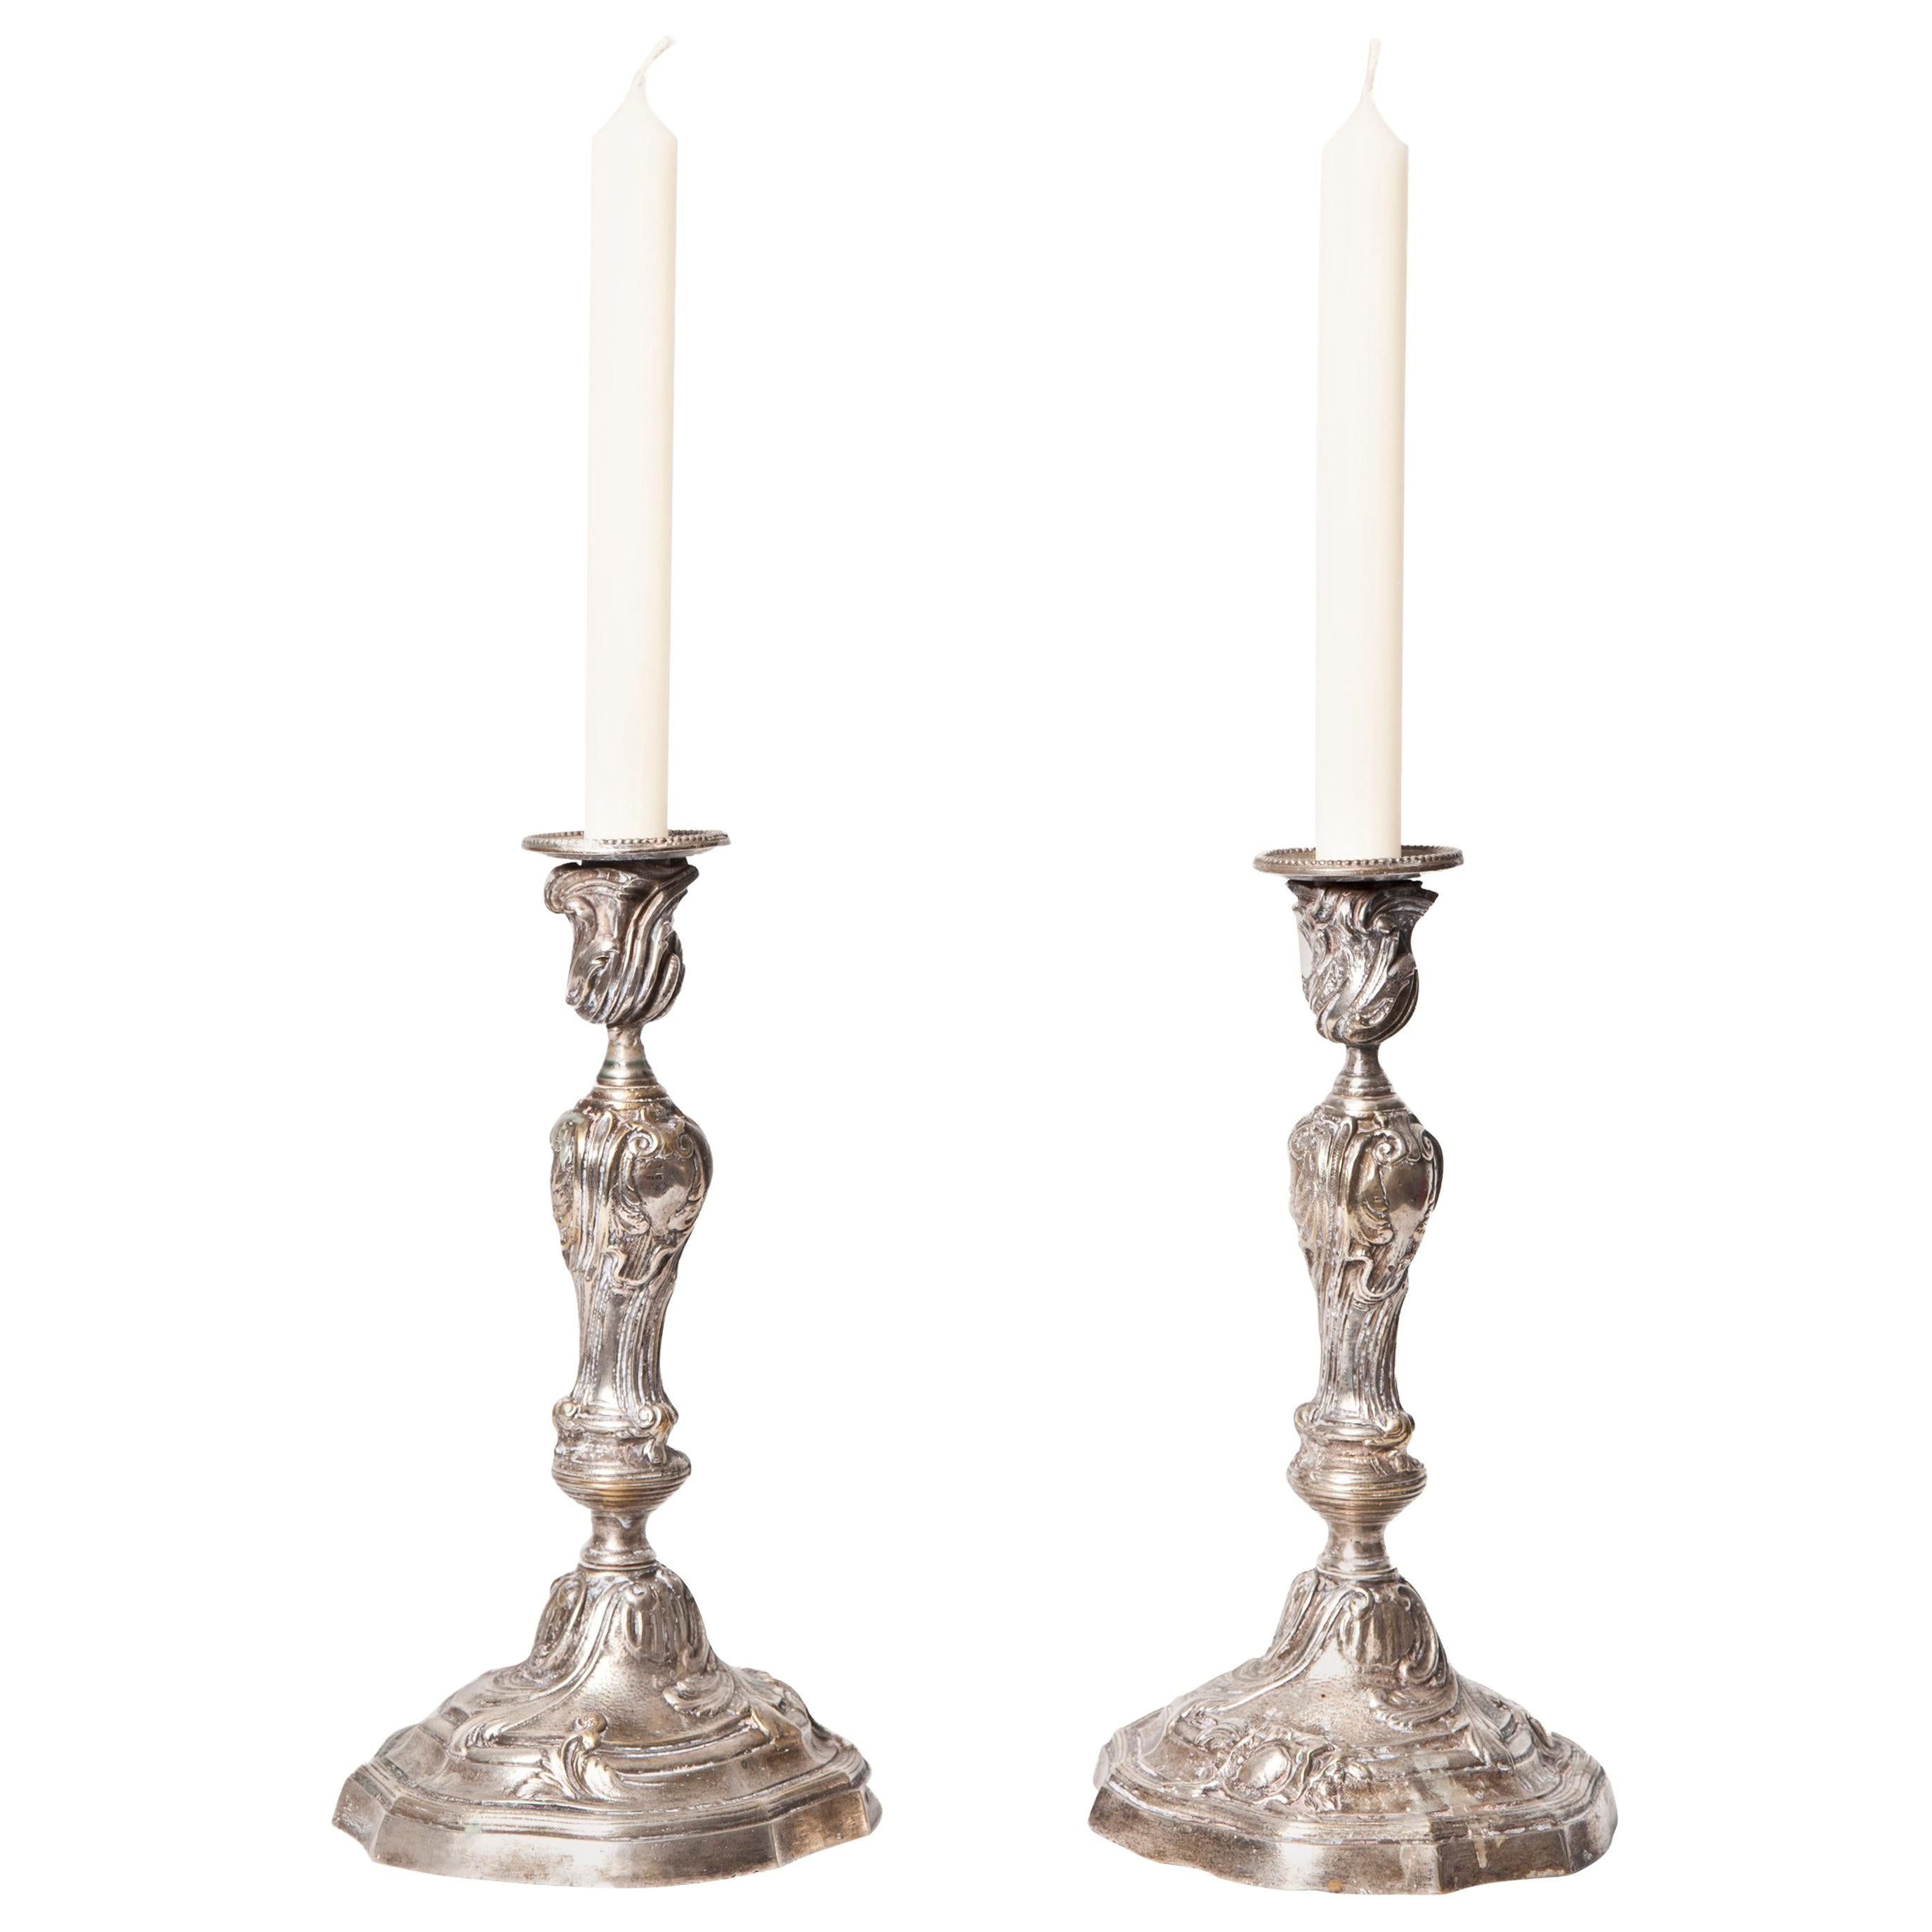 French, Pair of Silvered Bronze Louis XV Style Candlesticks